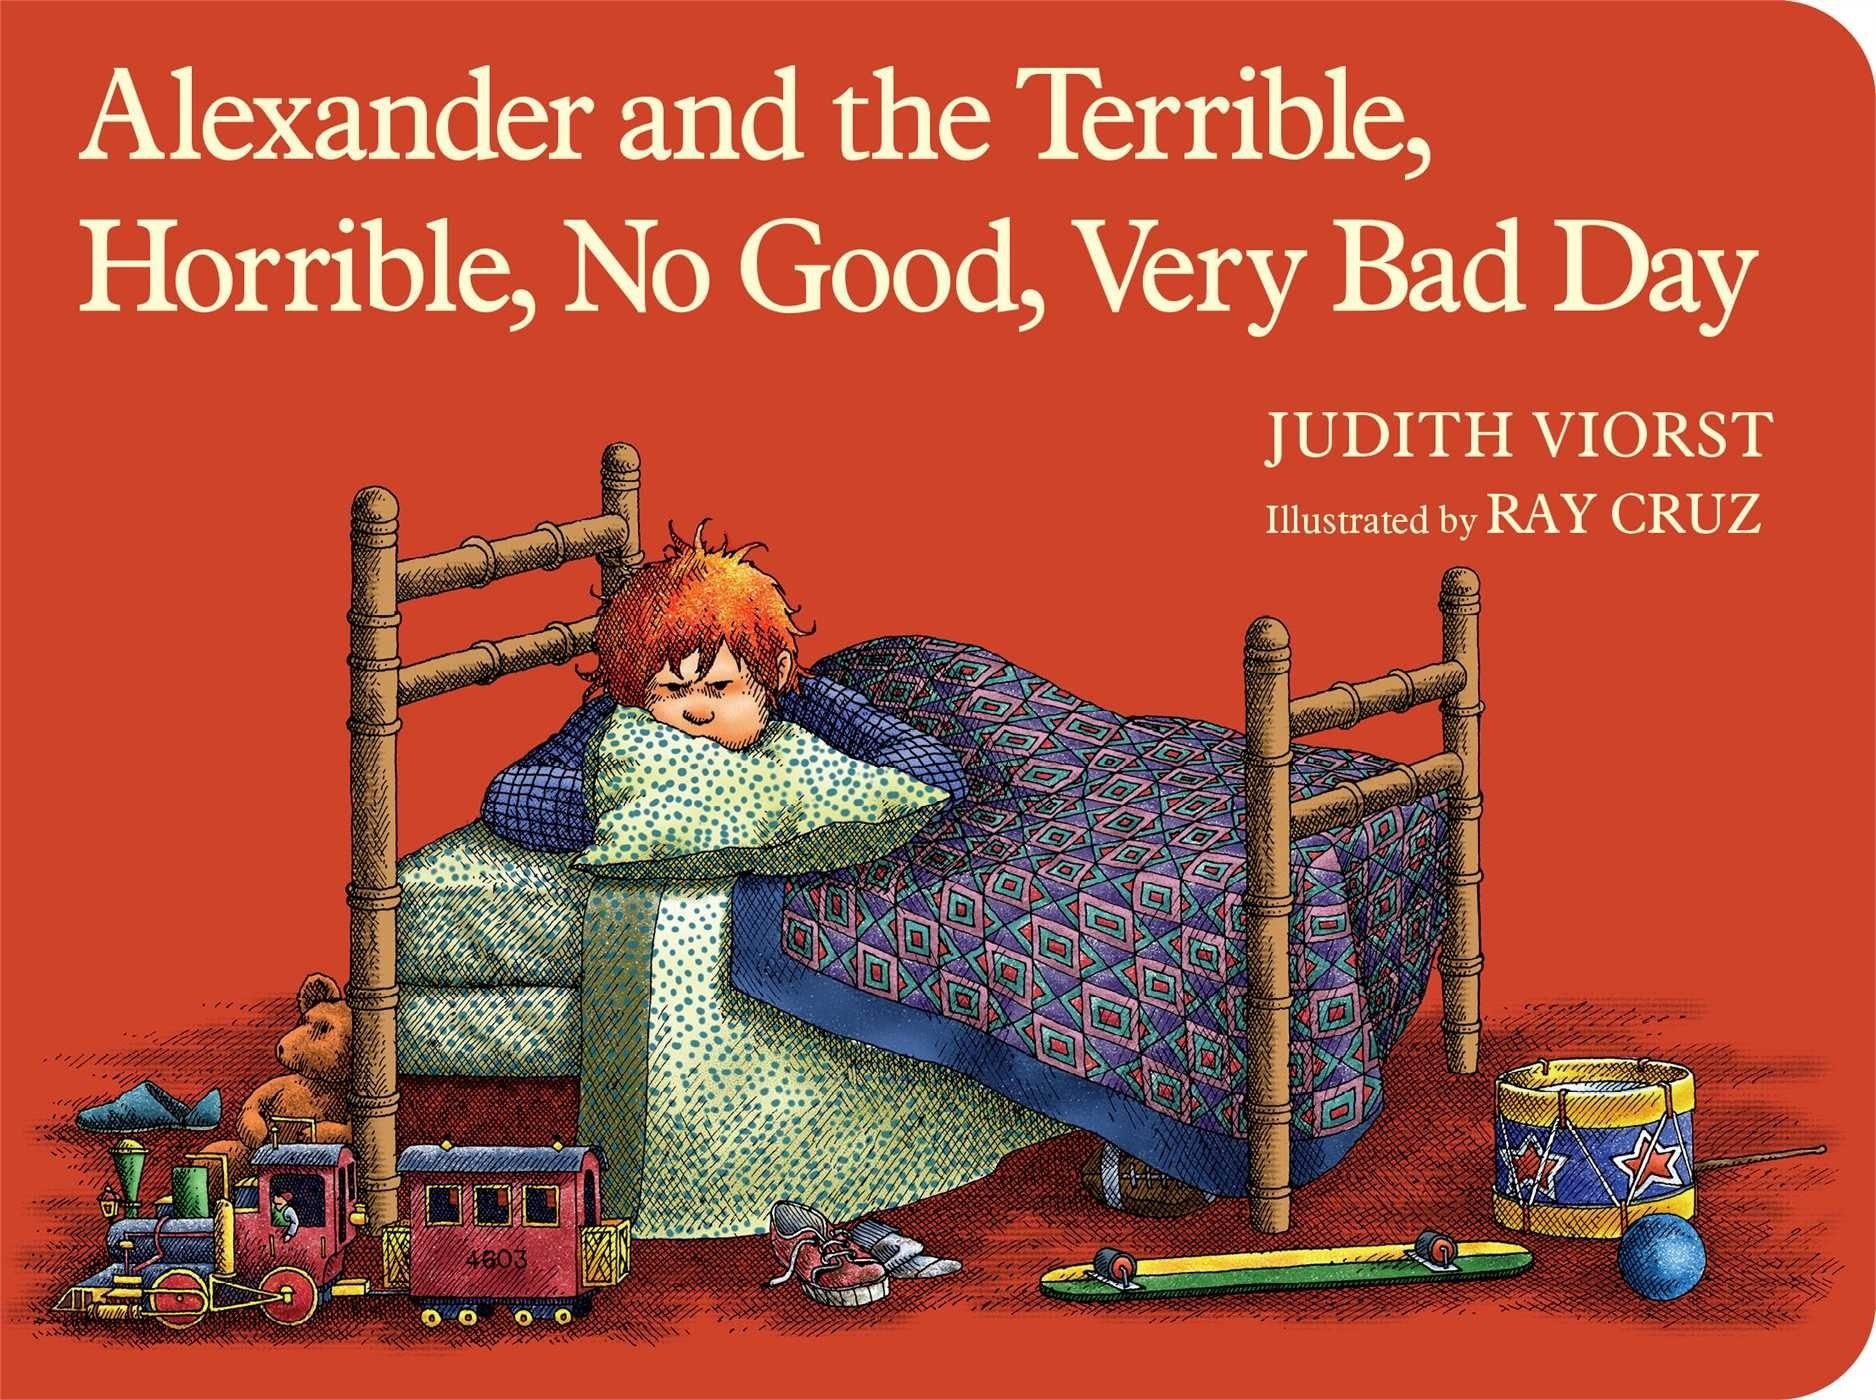 &quot;Alexander and the Terrible, Horrible, No Good, Very Bad Day&quot;